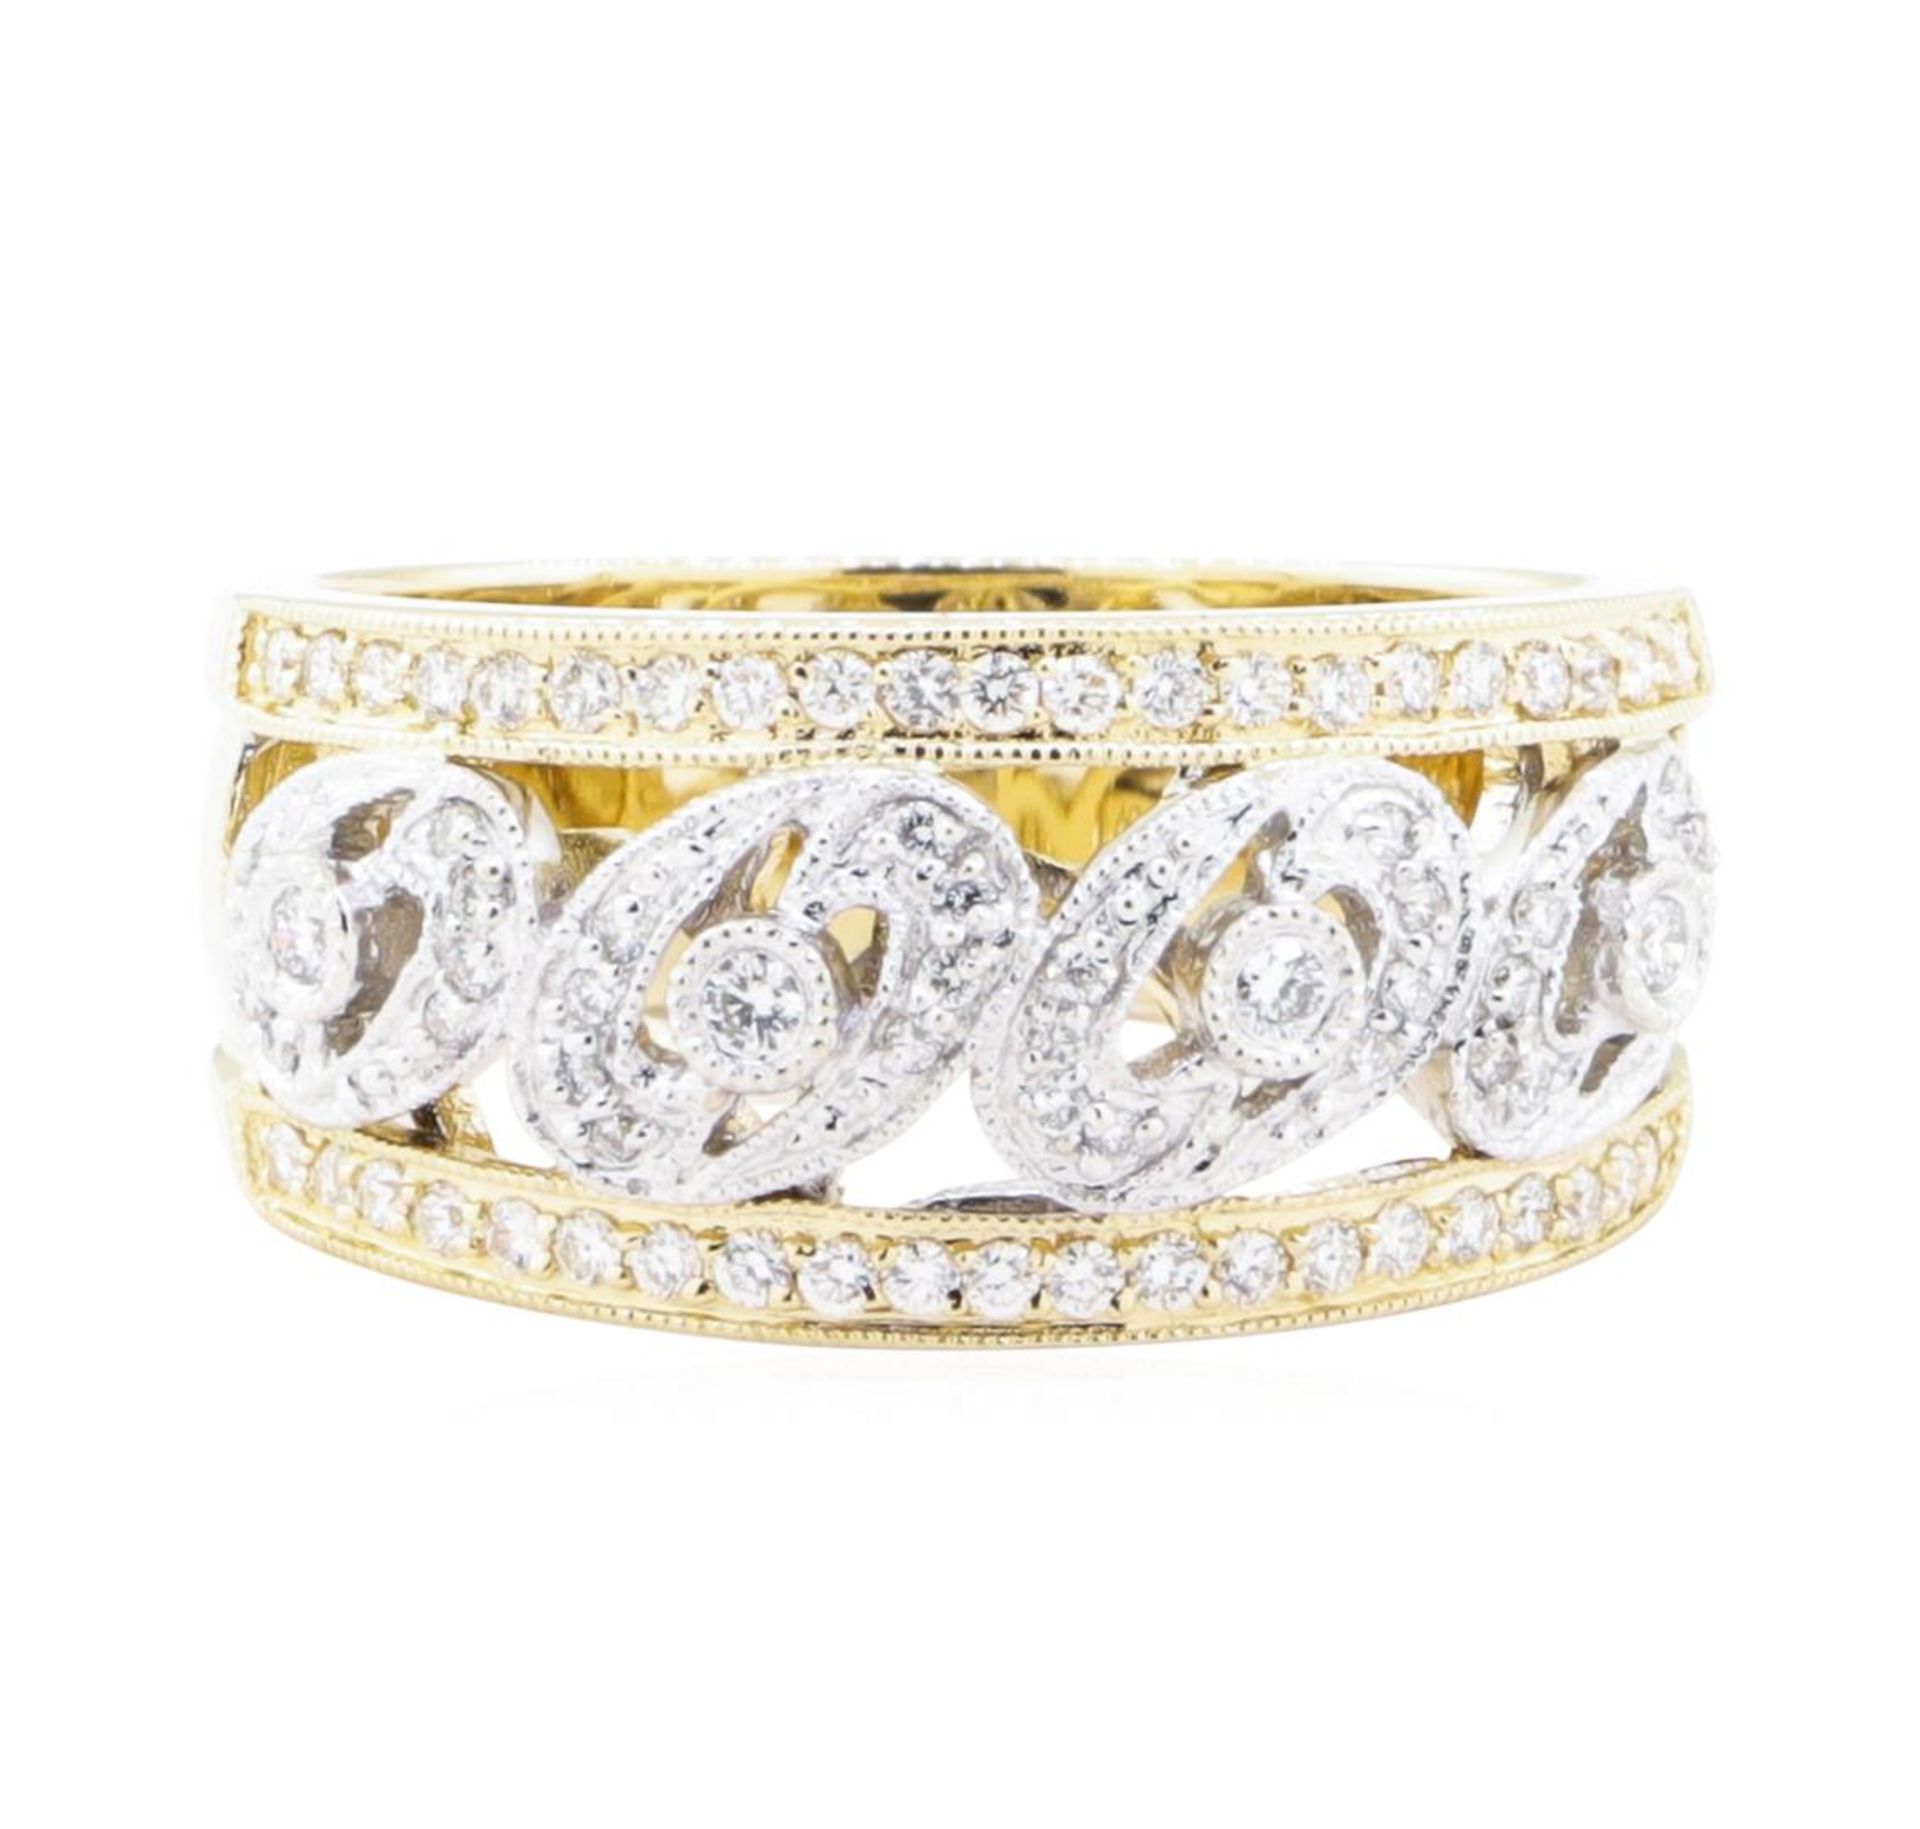 0.52 ctw Diamond Wide Band - 14KT Yellow And White Gold - Image 2 of 5